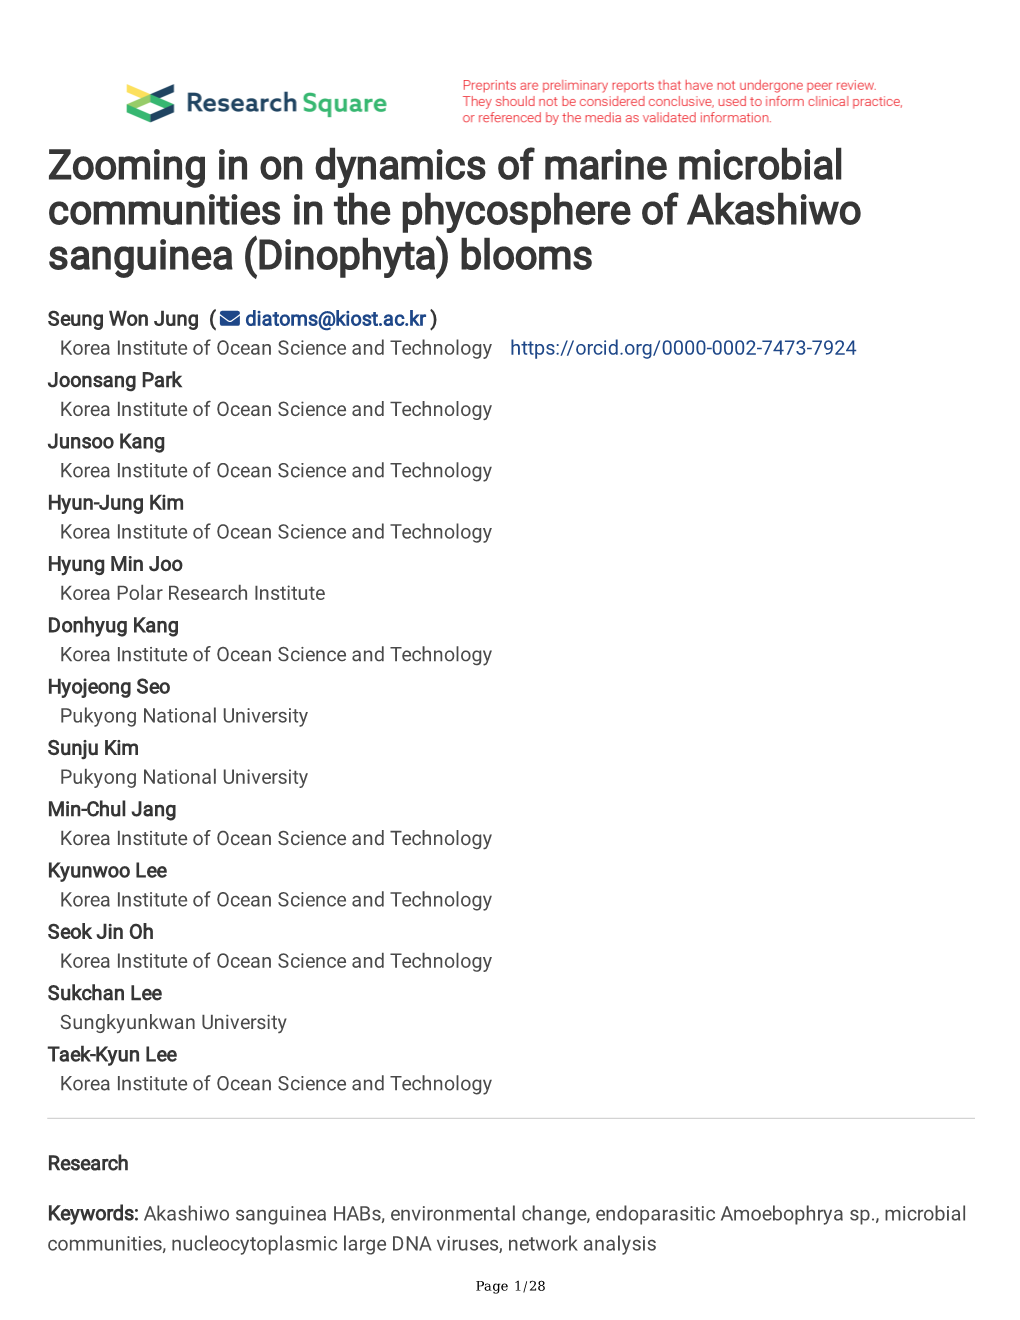 Zooming in on Dynamics of Marine Microbial Communities in the Phycosphere of Akashiwo Sanguinea (Dinophyta) Blooms